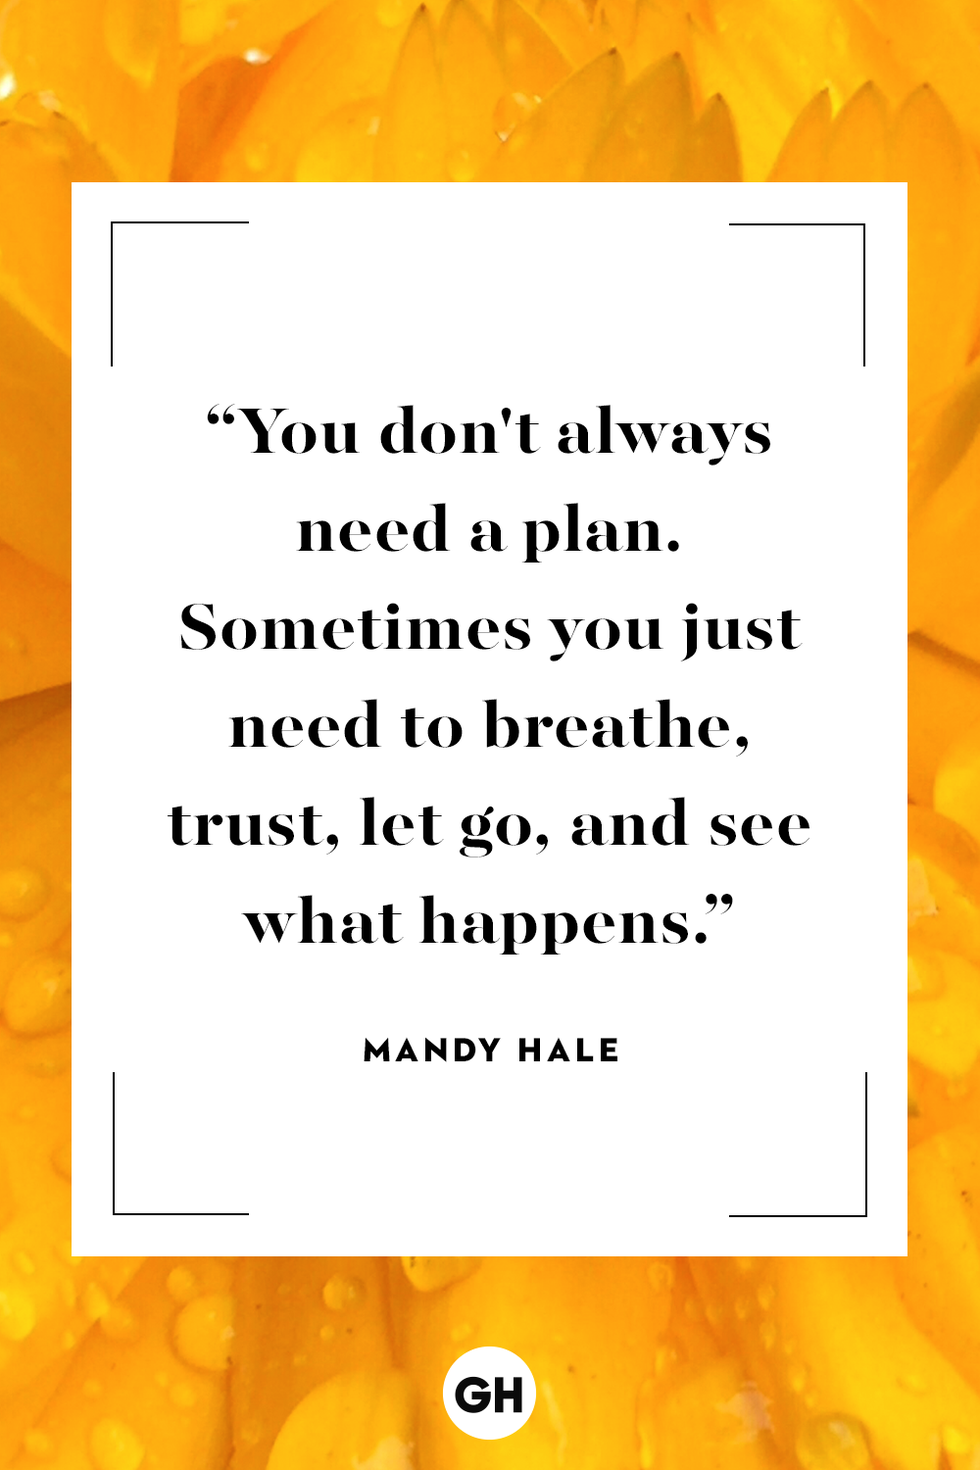 Mandy Hale inspirational quote